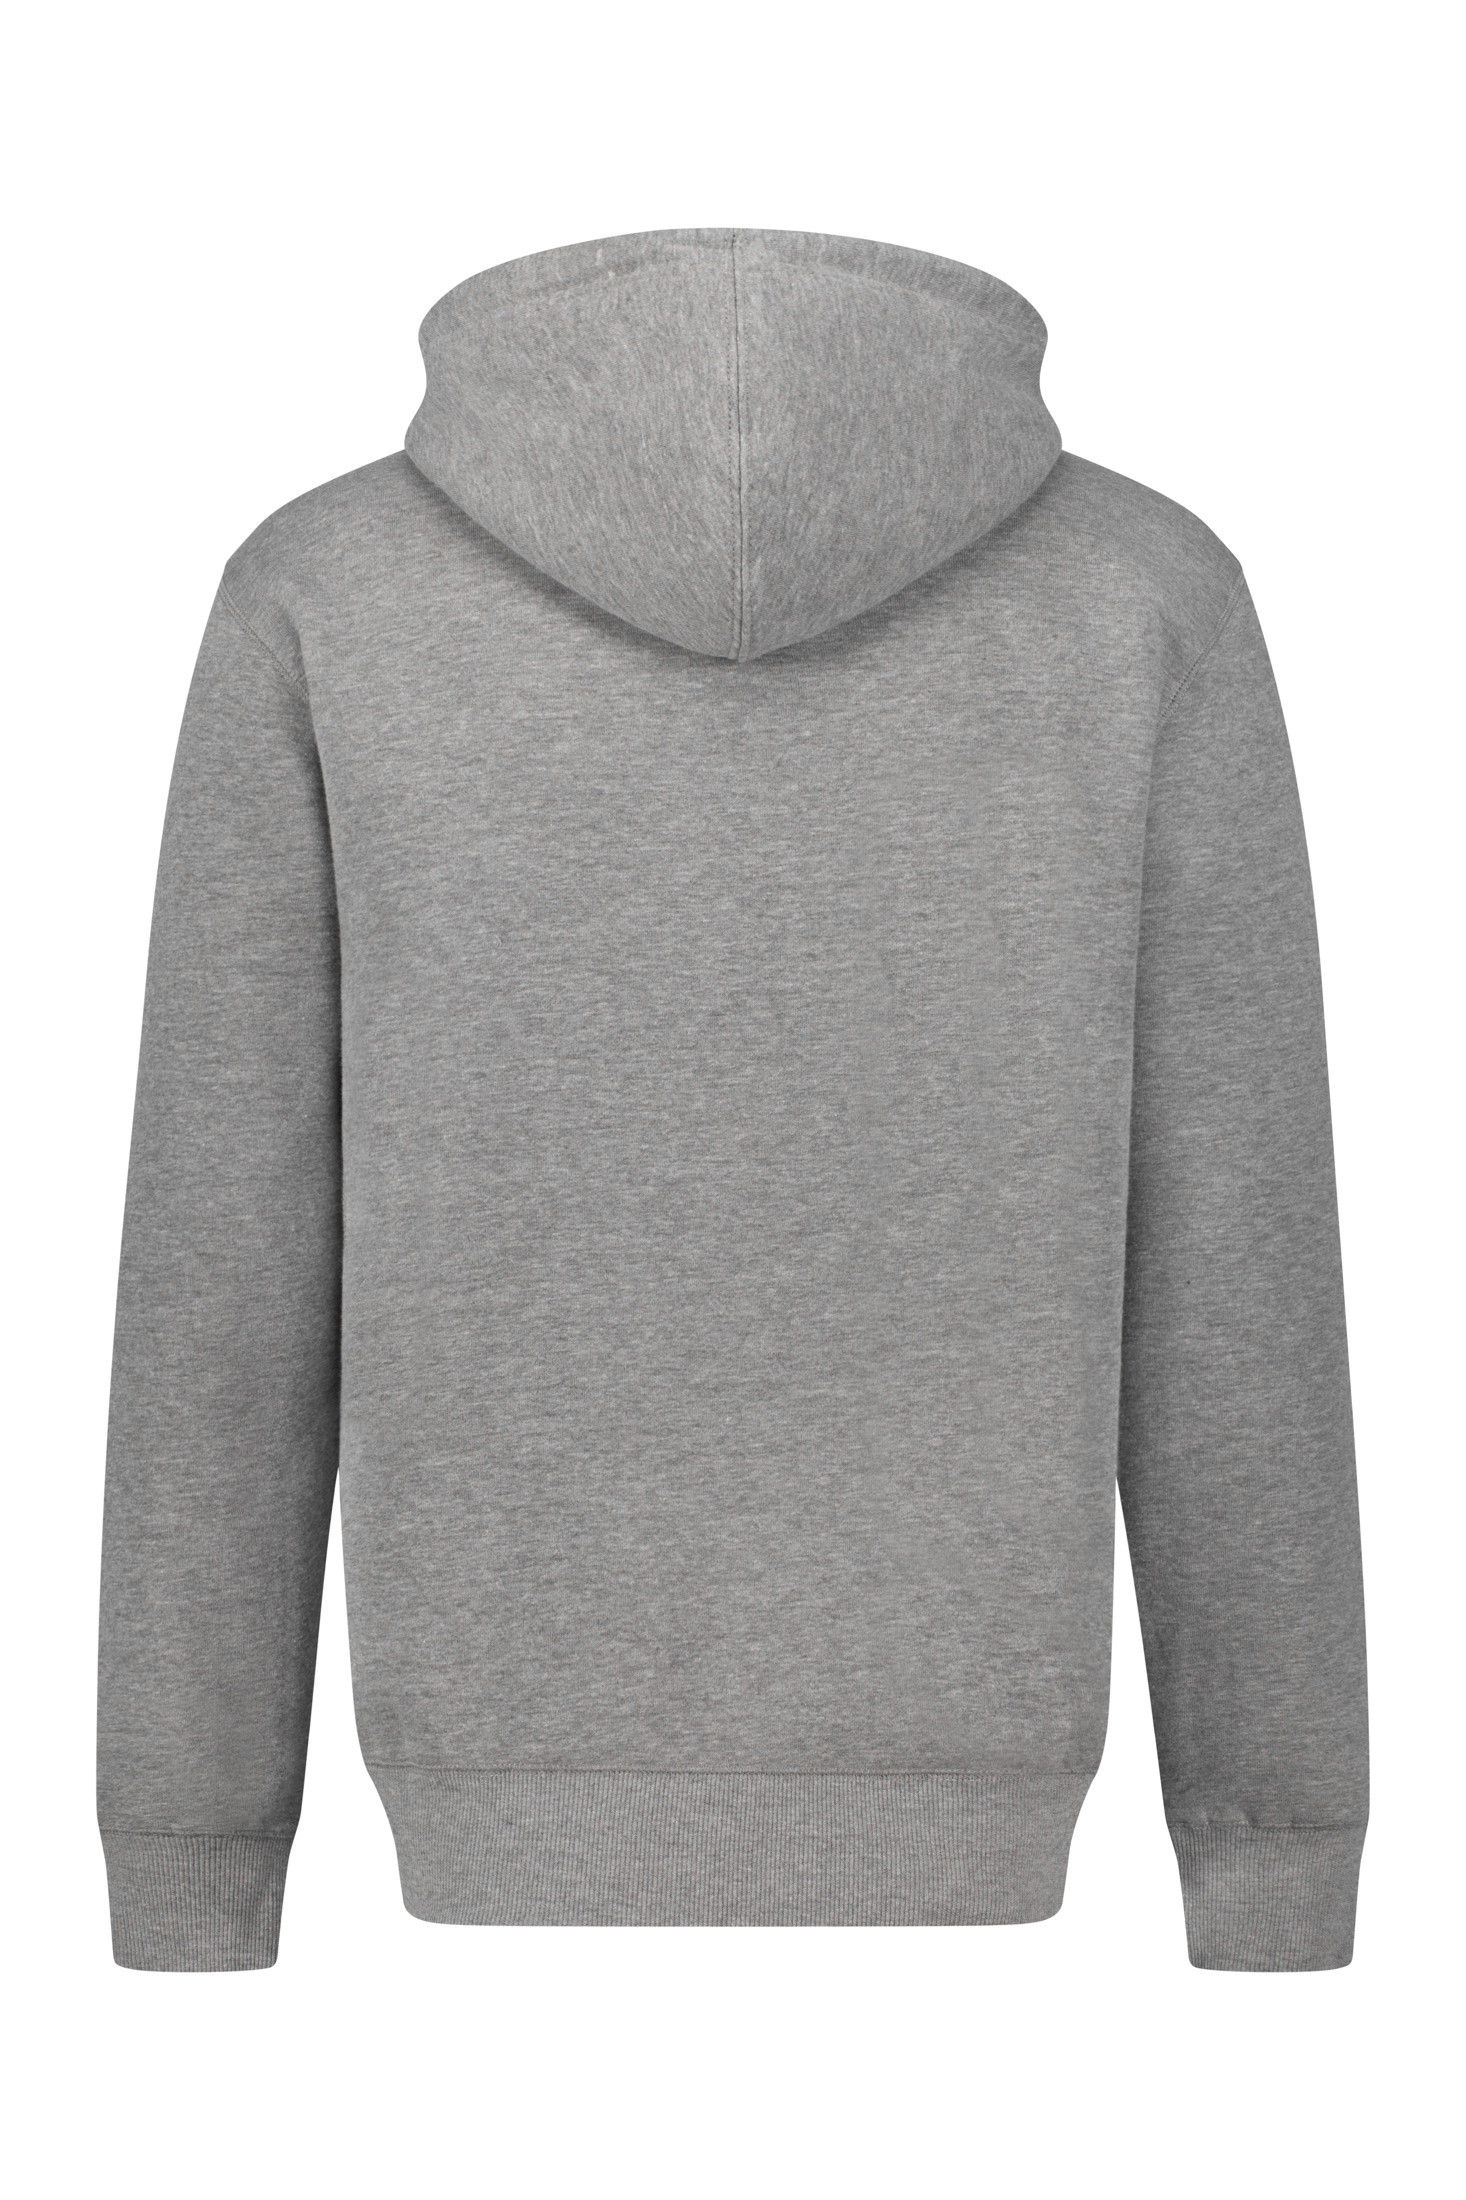 Russell Athletic - Hoodie, Light Grey, large image number 1